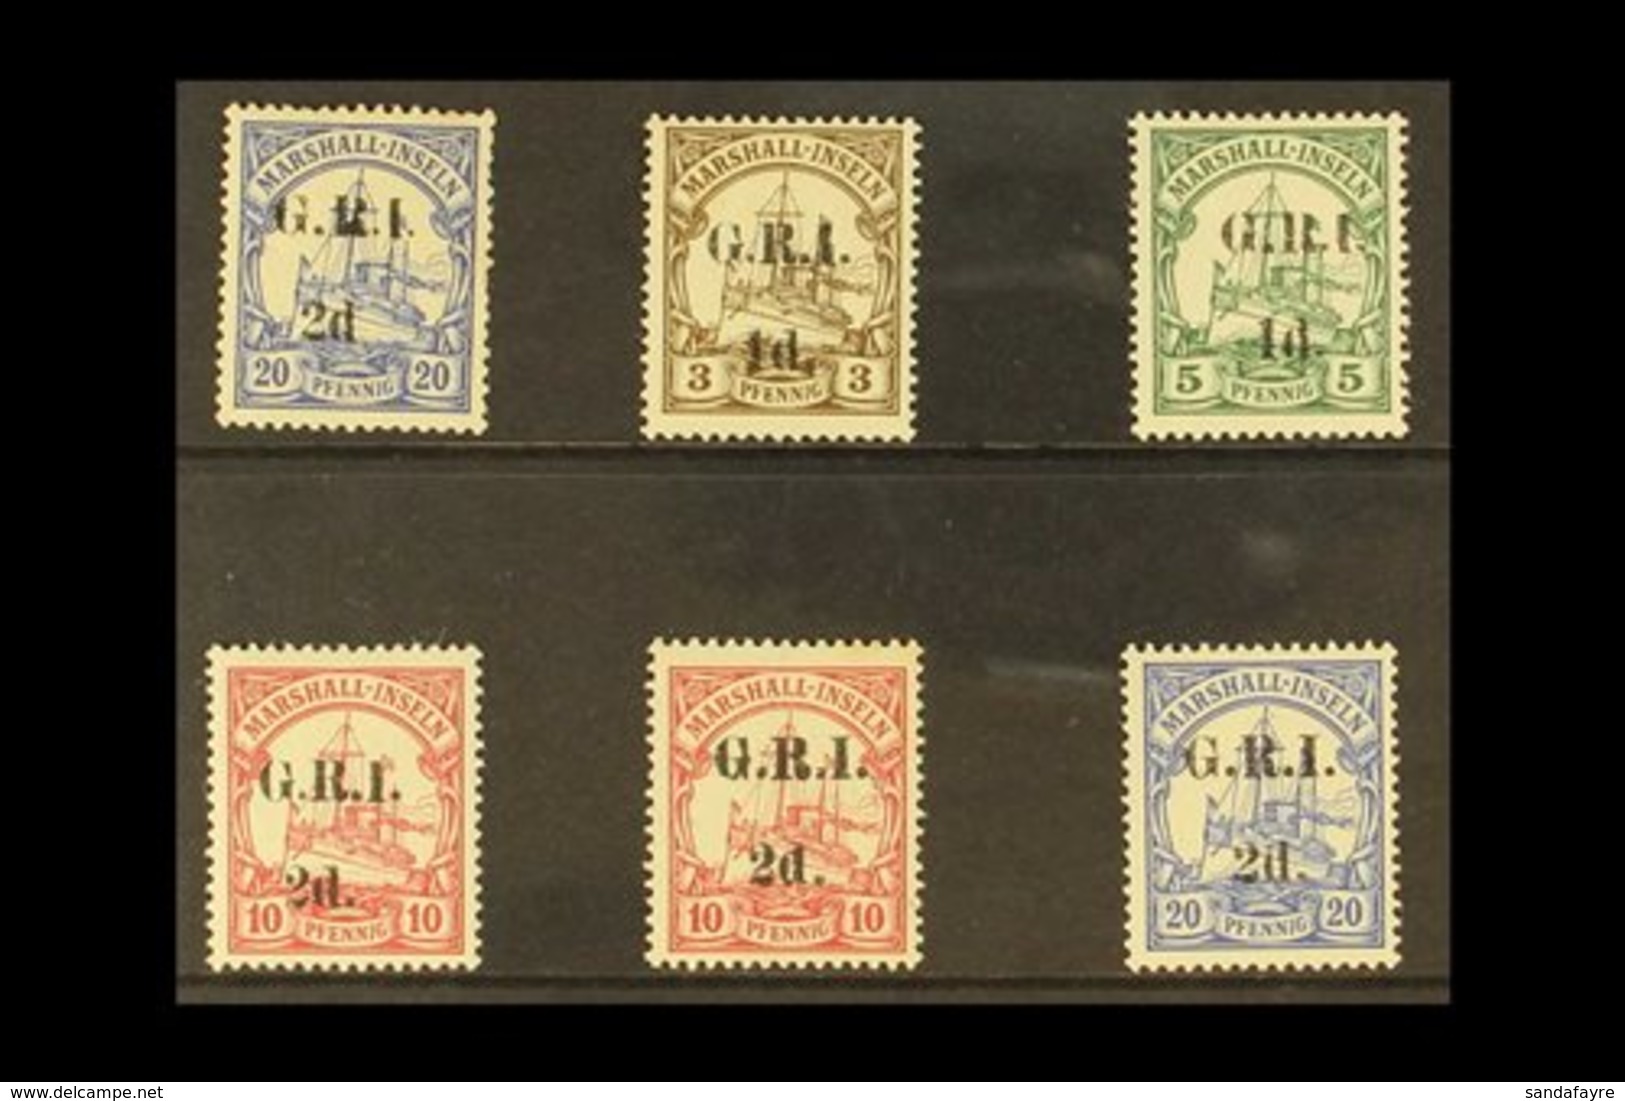 AUSTRALIAN OCCUPATION  1914 FINE MINT Marshall Islands Surcharged Selection, ALL DIFFERENT With Some Overprint Variants  - Papua New Guinea